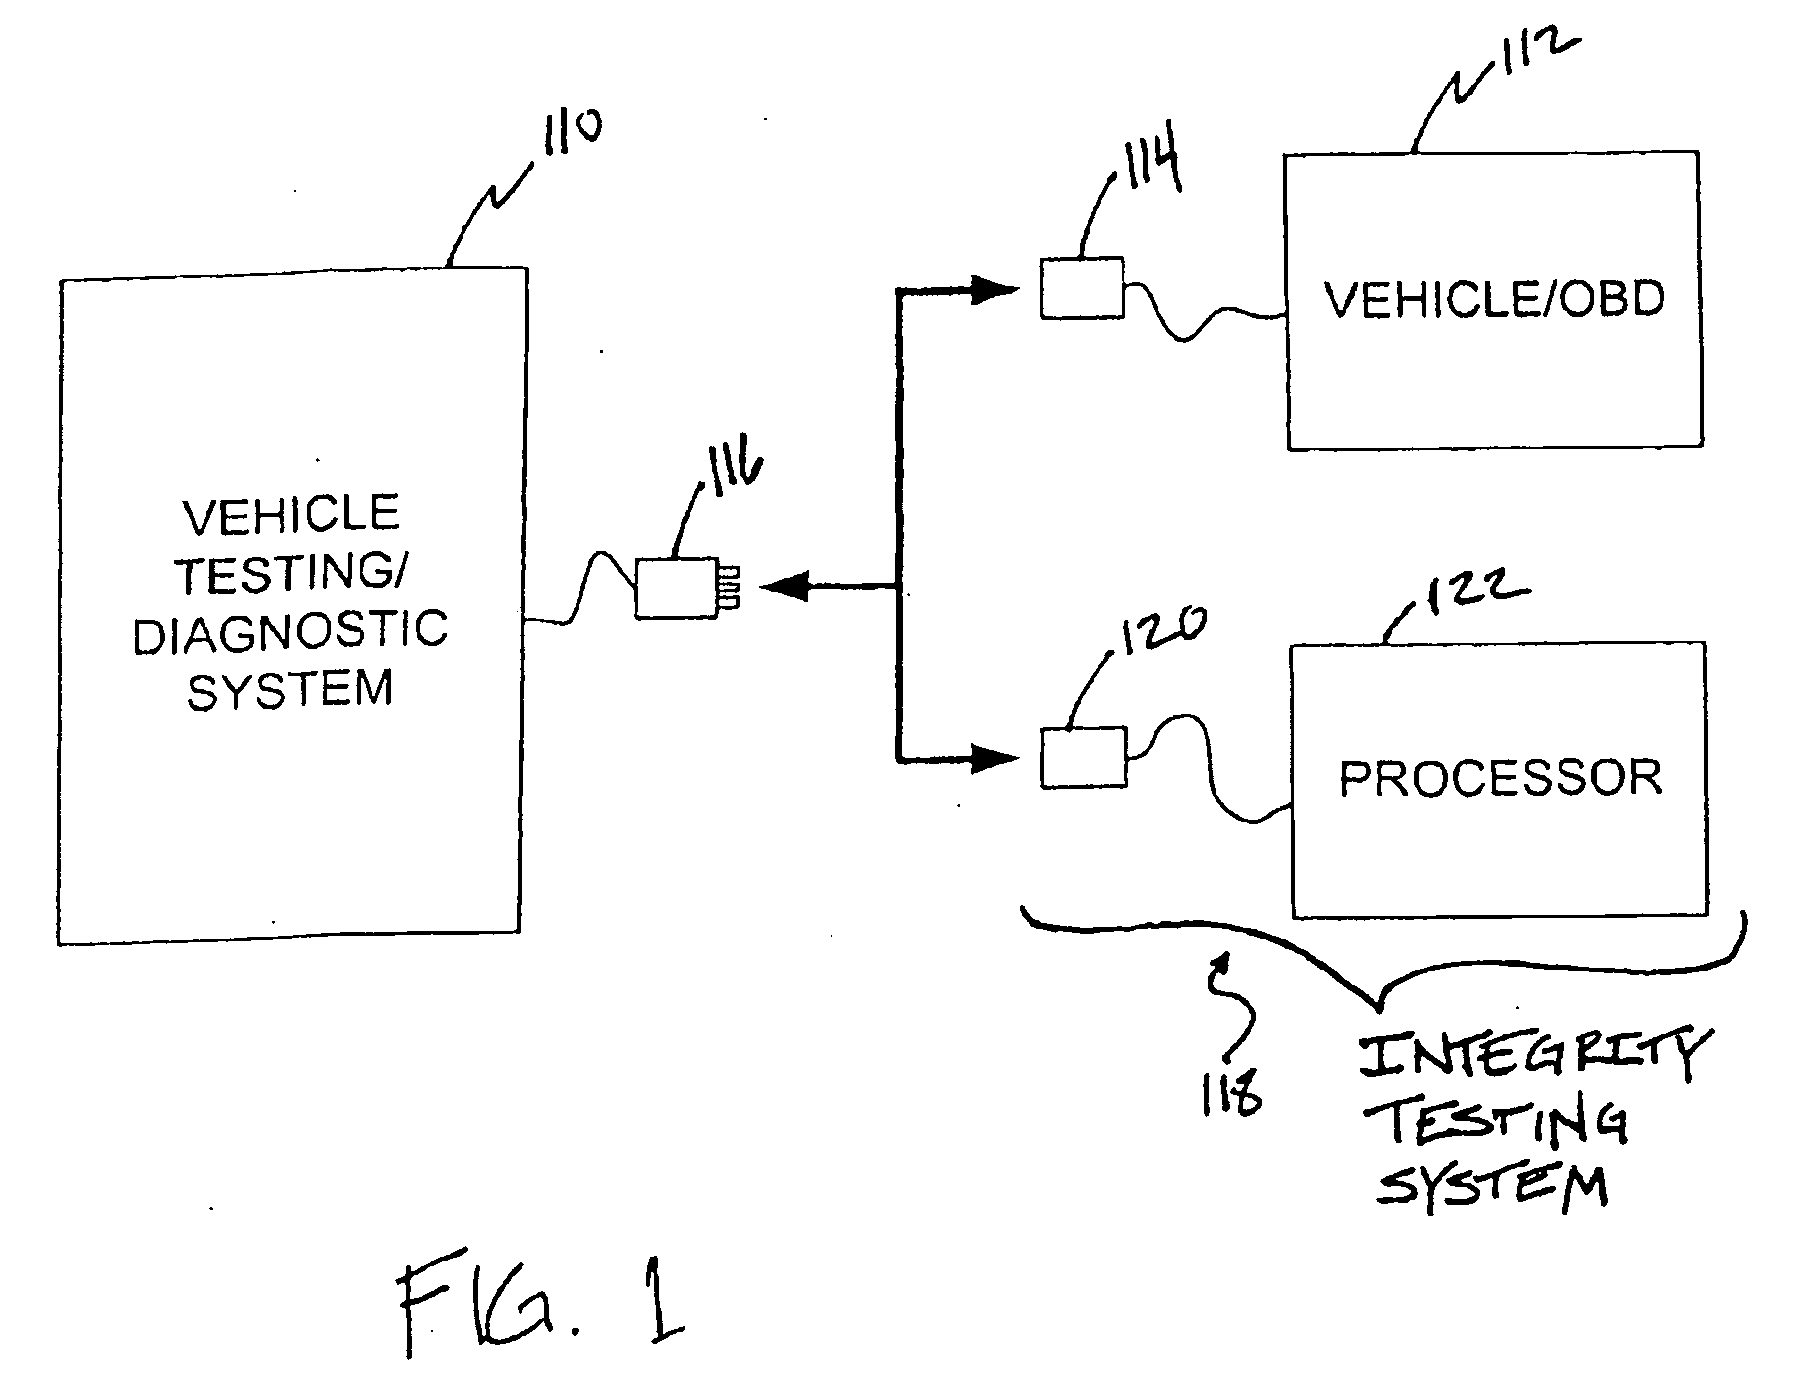 System and method for testing the integrity of a vehicle testing/diagnostic system